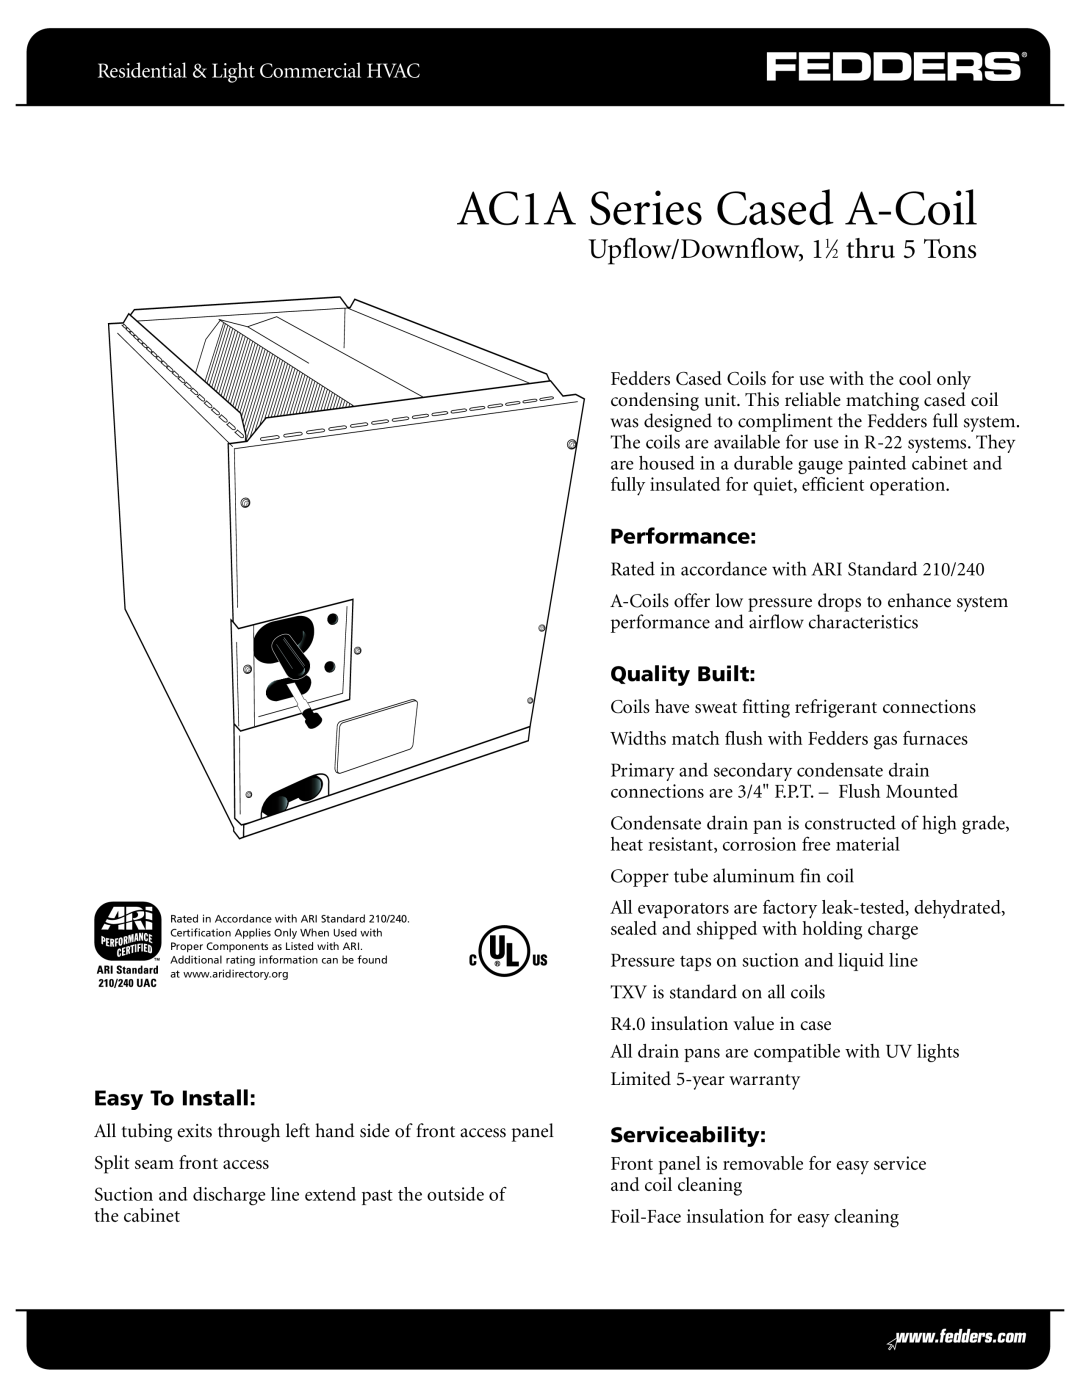 Fedders warranty AC1A Series Cased A-Coil, Upflow/Downflow, 11⁄2 thru 5 Tons, Residential & Light Commercial HVAC 